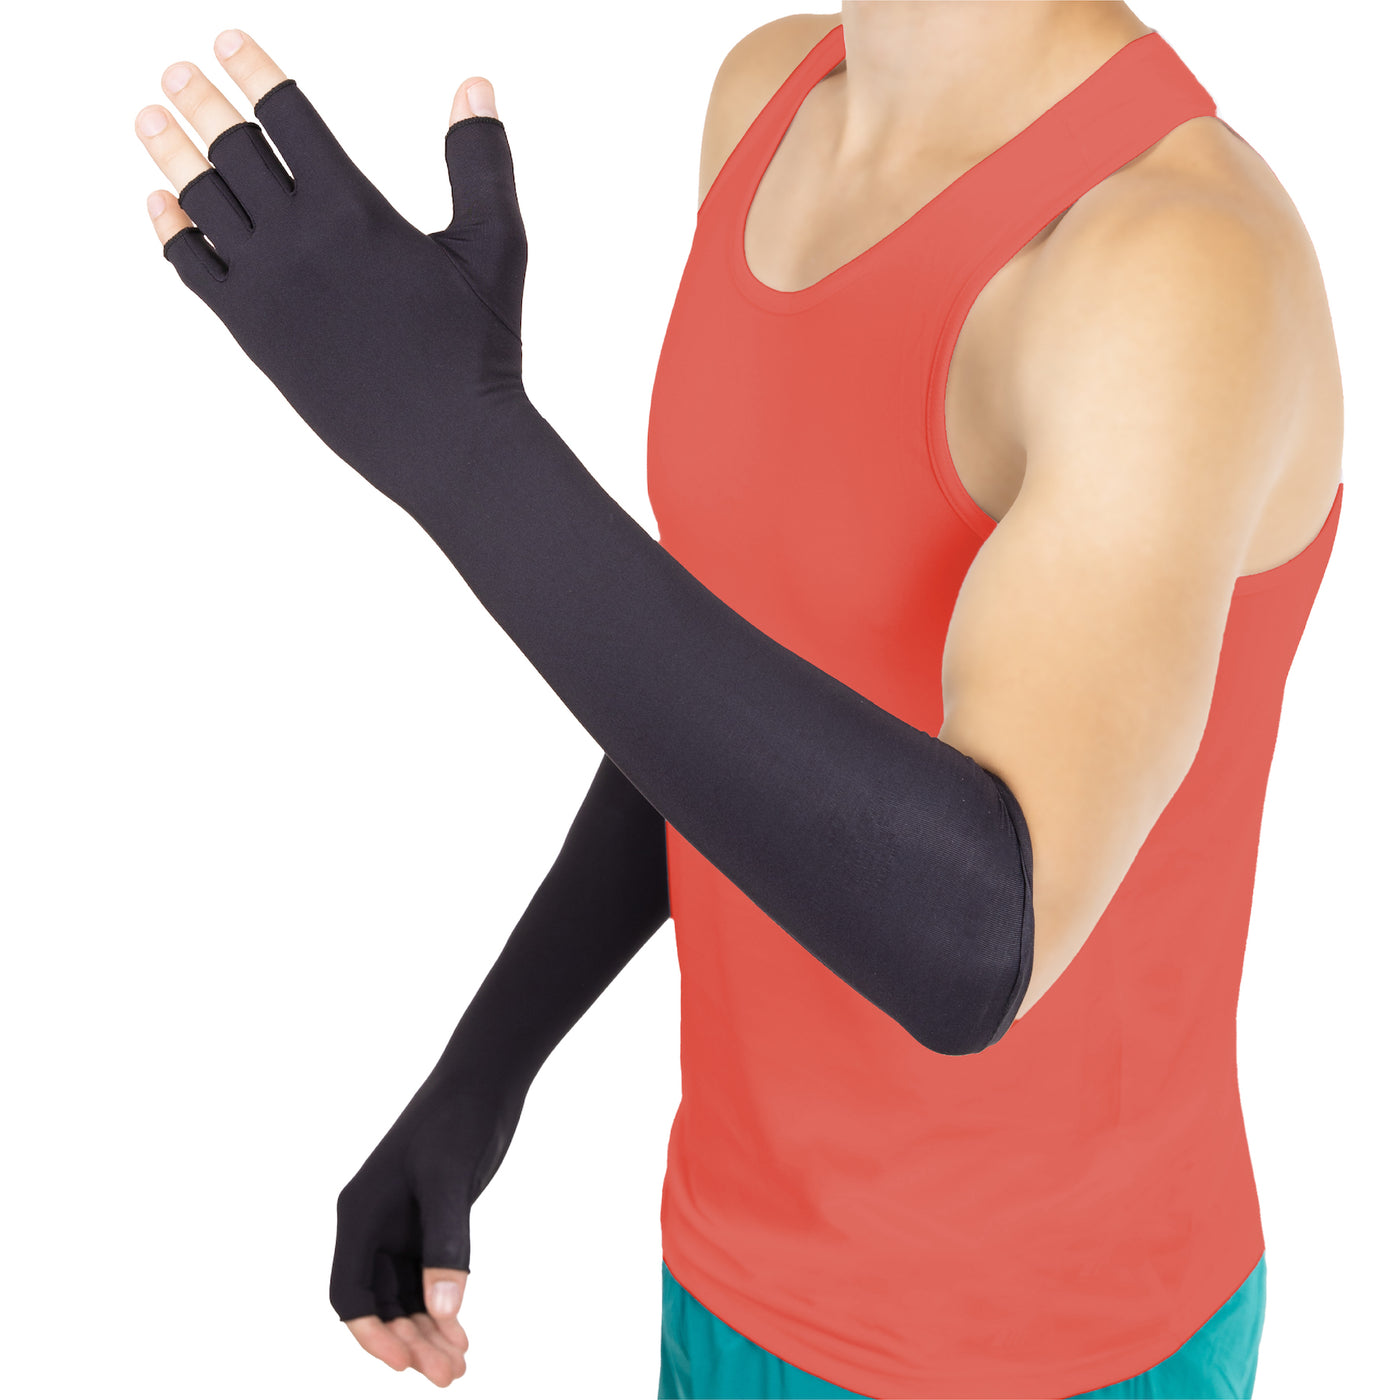 New Anti Wrist Brace,Can Be Used with Pencil Grips Nepal